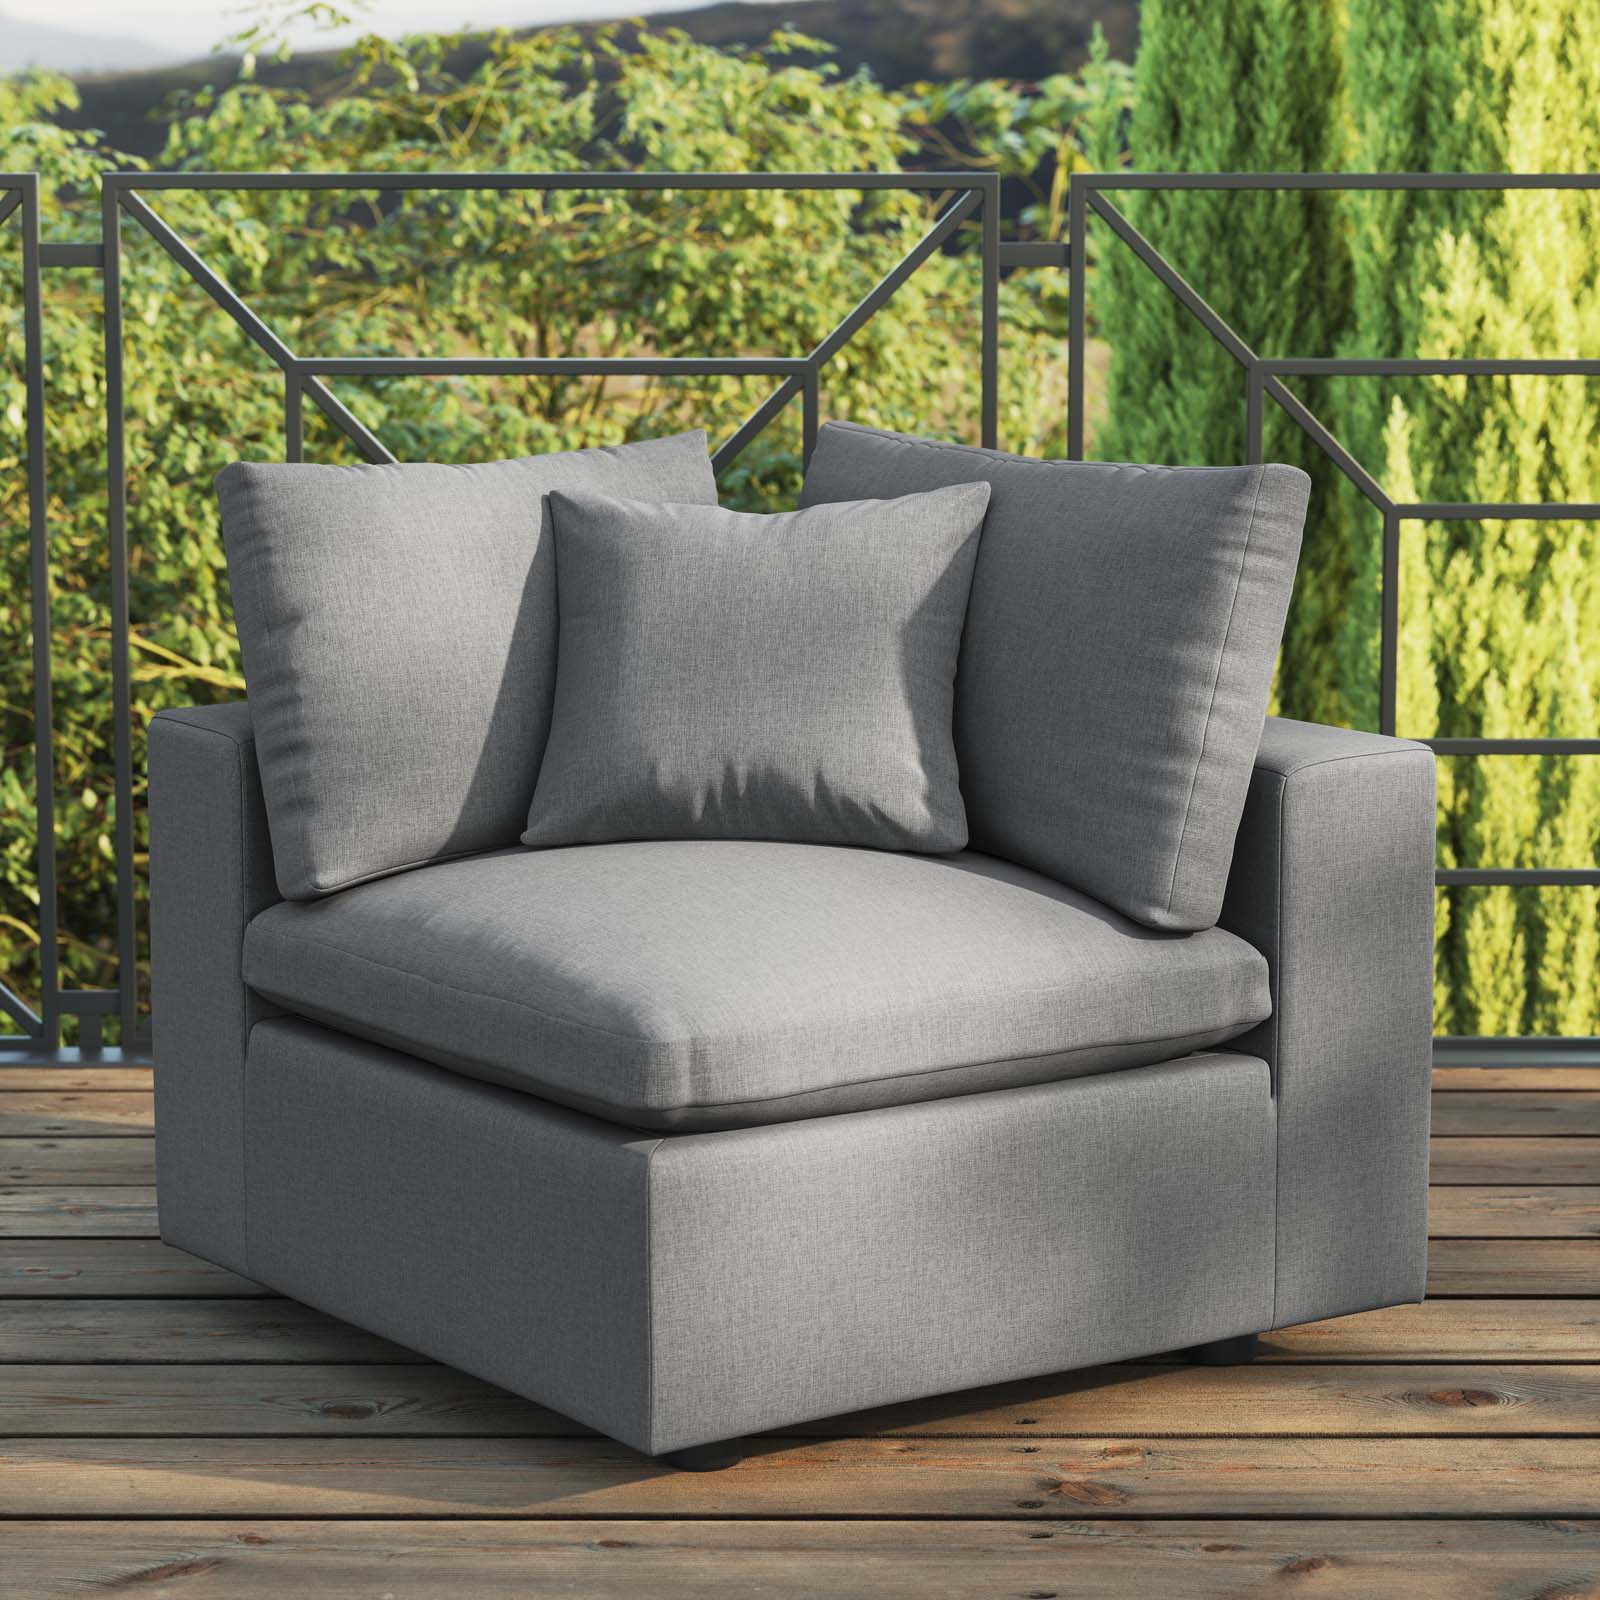 Modway Outdoor Chairs - Commix Overstuffed Outdoor Patio Corner Chair Charcoal